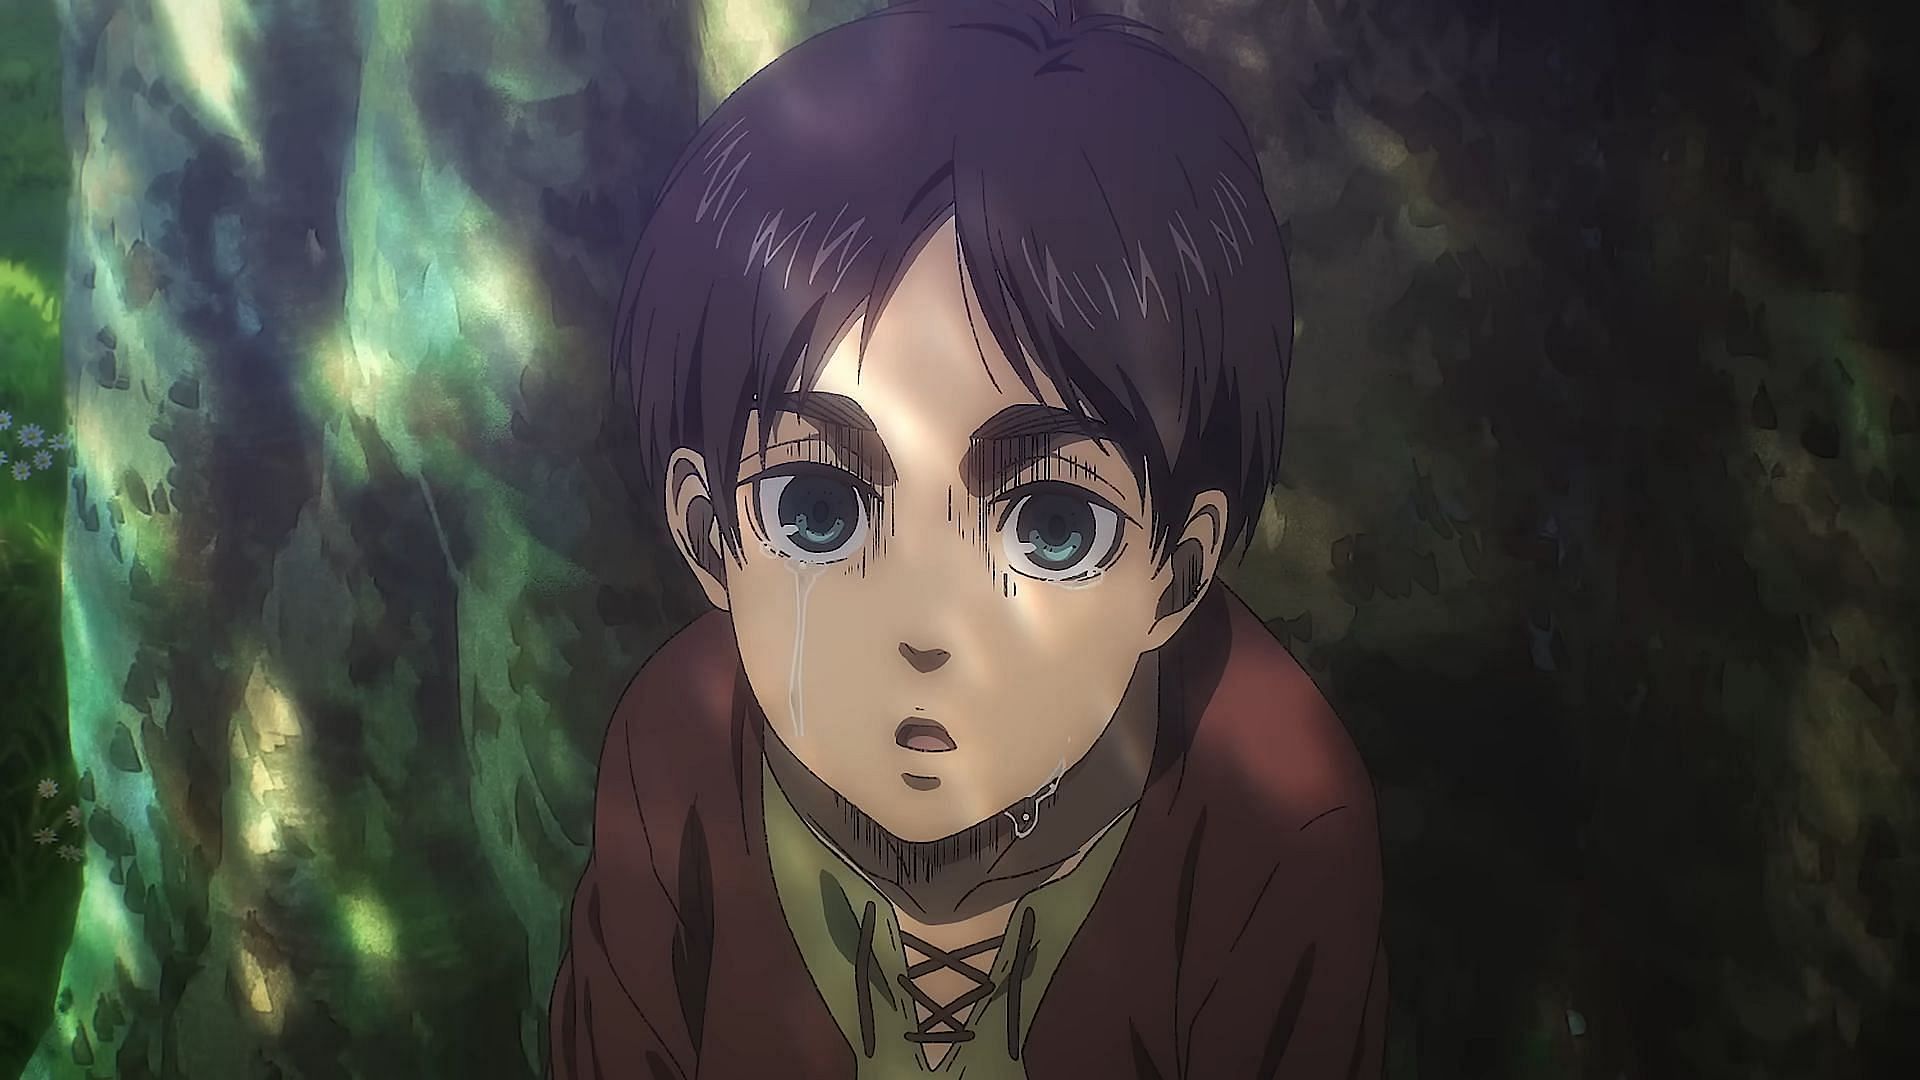 What Time Will The Final Episode of 'Attack on Titan' Premiere on Hulu and  Crunchyroll?